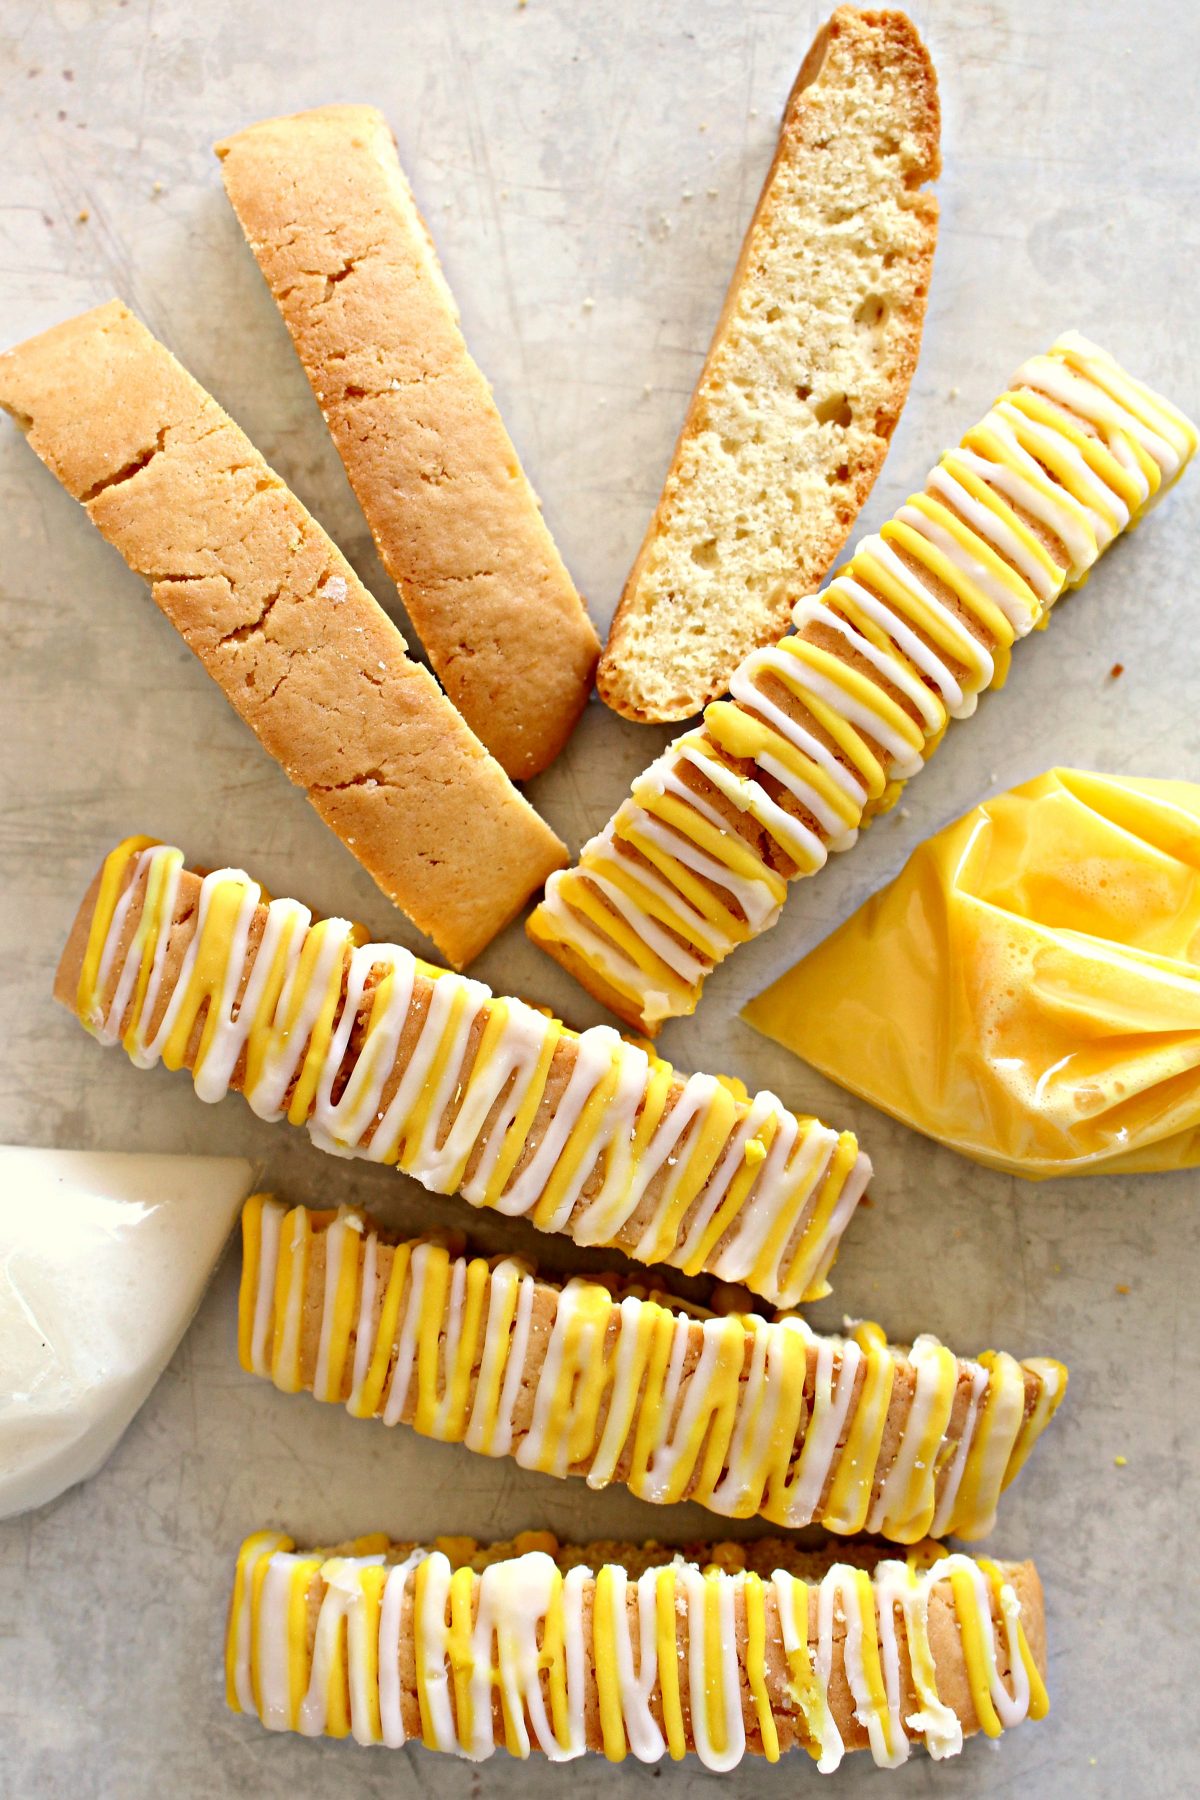 Lemon Biscotti, some decorated with yellow and white icing zigzags on top.